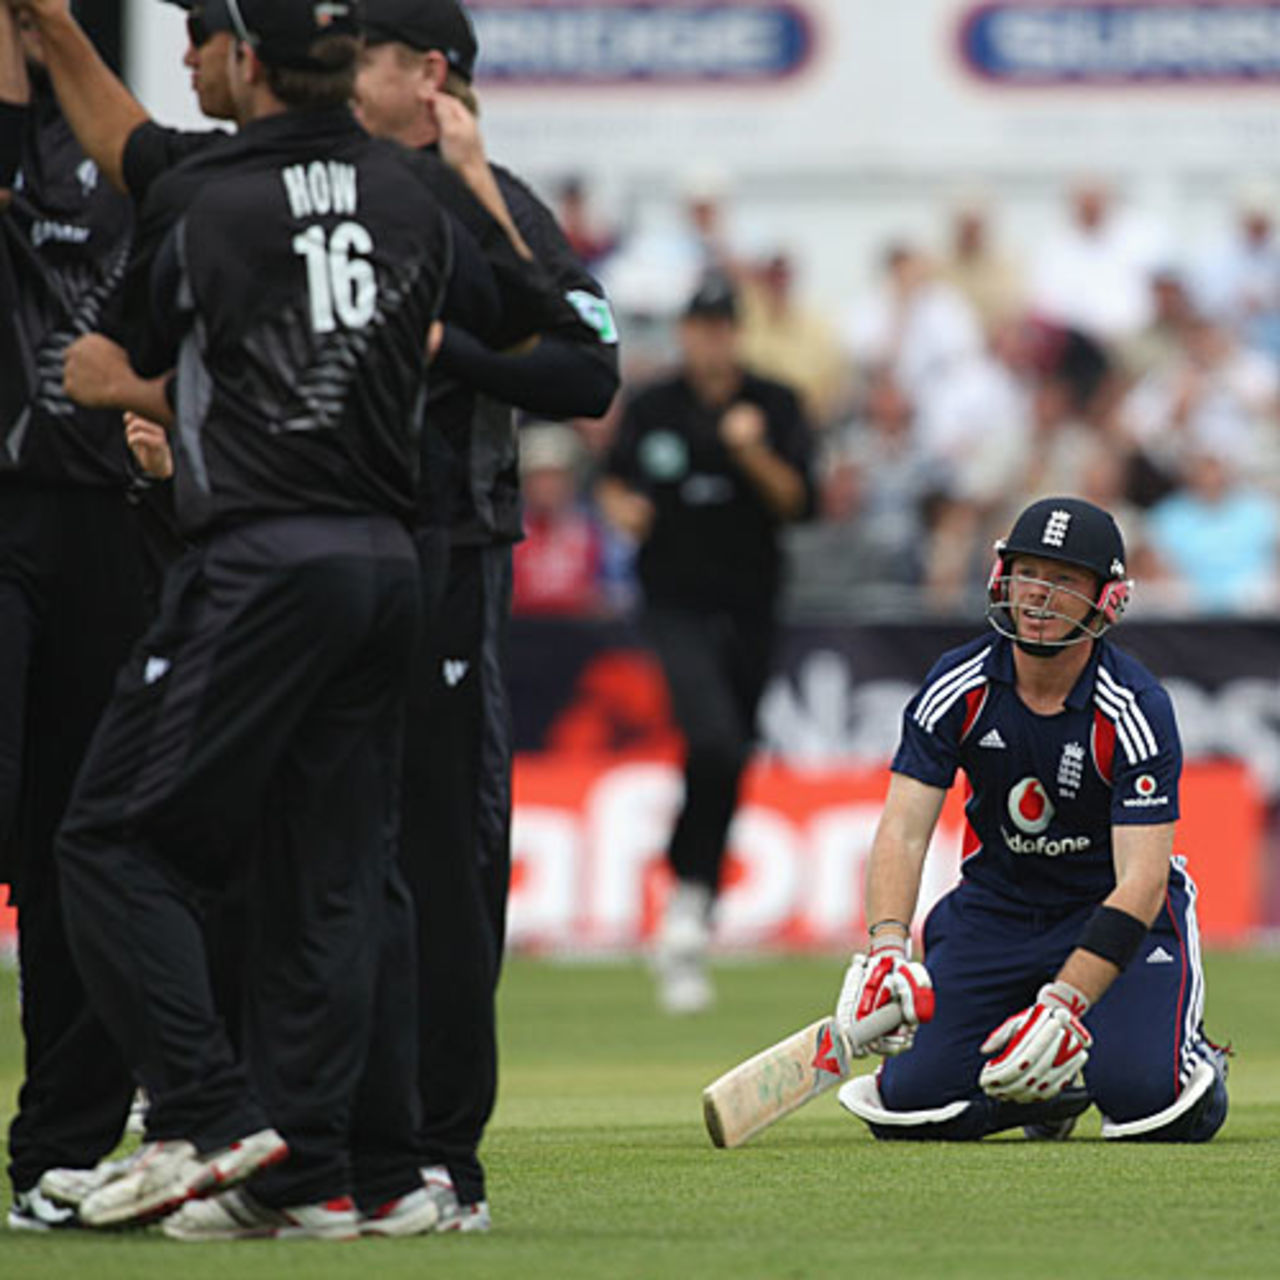 Ian Bell, down on his haunches, rues being run out, England v New Zealand, 1st ODI, Chester-le-Street, June 15, 2008